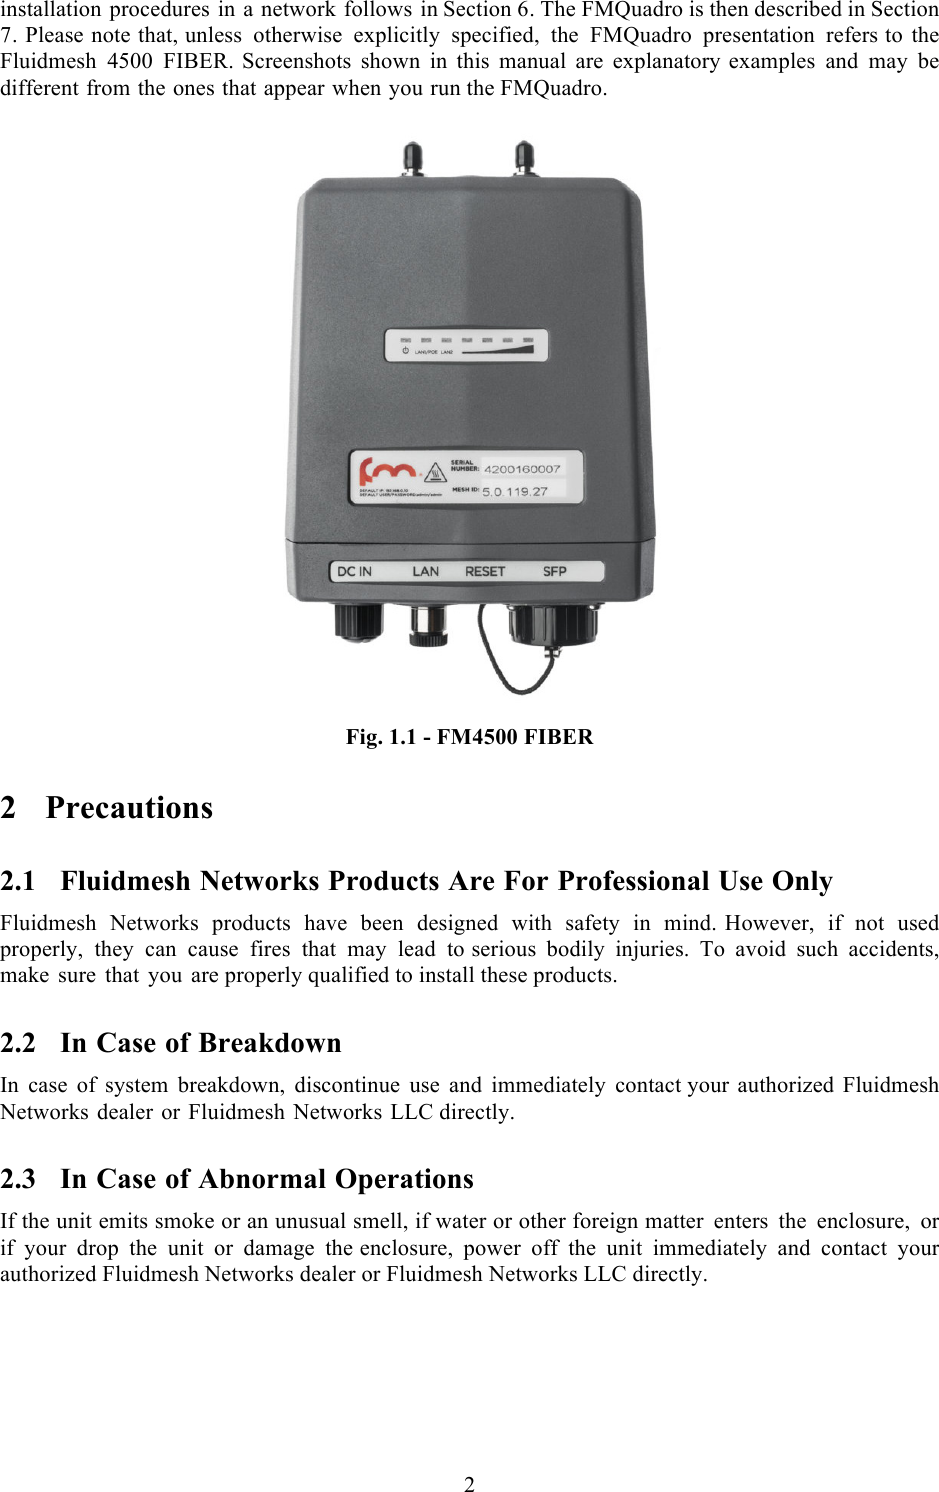  2  installation procedures in a network follows in Section 6. The FMQuadro is then described in Section 7. Please note that, unless otherwise explicitly specified, the FMQuadro presentation refers to the Fluidmesh 4500 FIBER. Screenshots shown in this manual are explanatory examples and may be different from the ones that appear when you run the FMQuadro.   Fig. 1.1 - FM4500 FIBER 2 Precautions 2.1 Fluidmesh Networks Products Are For Professional Use Only Fluidmesh Networks products have been designed with safety in mind. However, if not used properly, they can cause fires that may lead to serious bodily injuries. To avoid such accidents, make sure that you are properly qualified to install these products. 2.2 In Case of Breakdown In case of system breakdown, discontinue use and immediately contact your authorized Fluidmesh Networks dealer or Fluidmesh Networks LLC directly. 2.3 In Case of Abnormal Operations If the unit emits smoke or an unusual smell, if water or other foreign matter enters the enclosure,  or if your drop the unit or damage the enclosure, power off the unit immediately and contact your authorized Fluidmesh Networks dealer or Fluidmesh Networks LLC directly. 